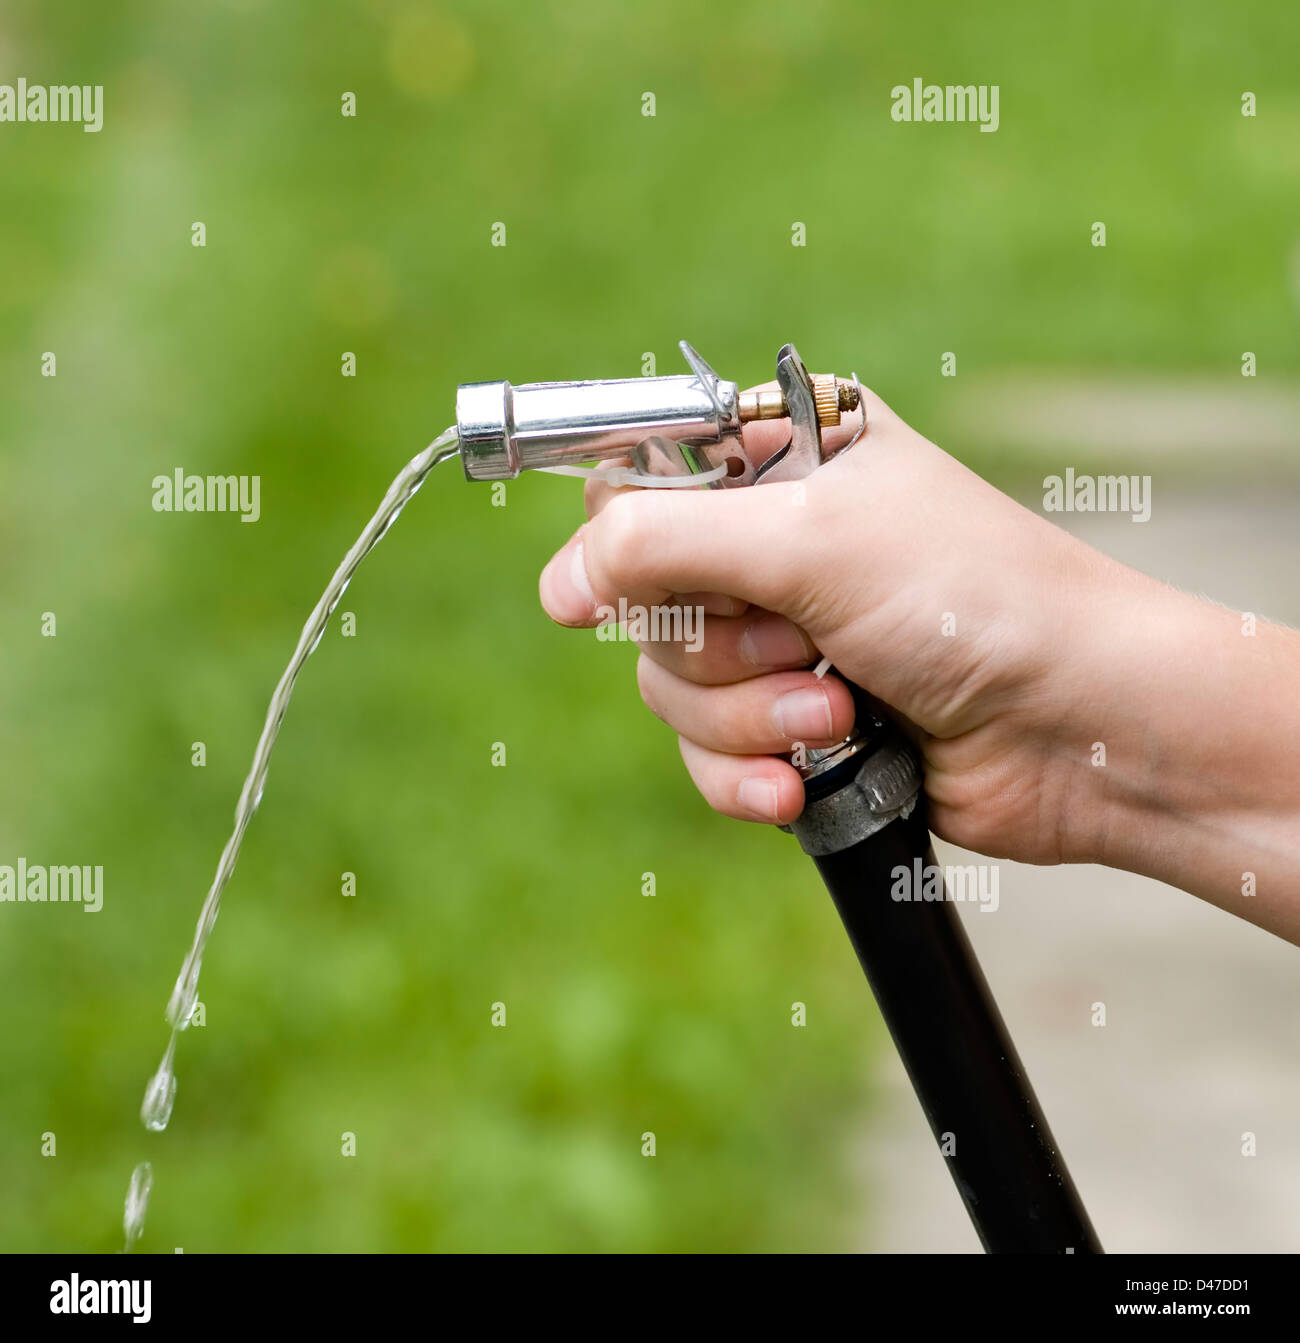 Person holding water hose in garden, close up Stock Photo